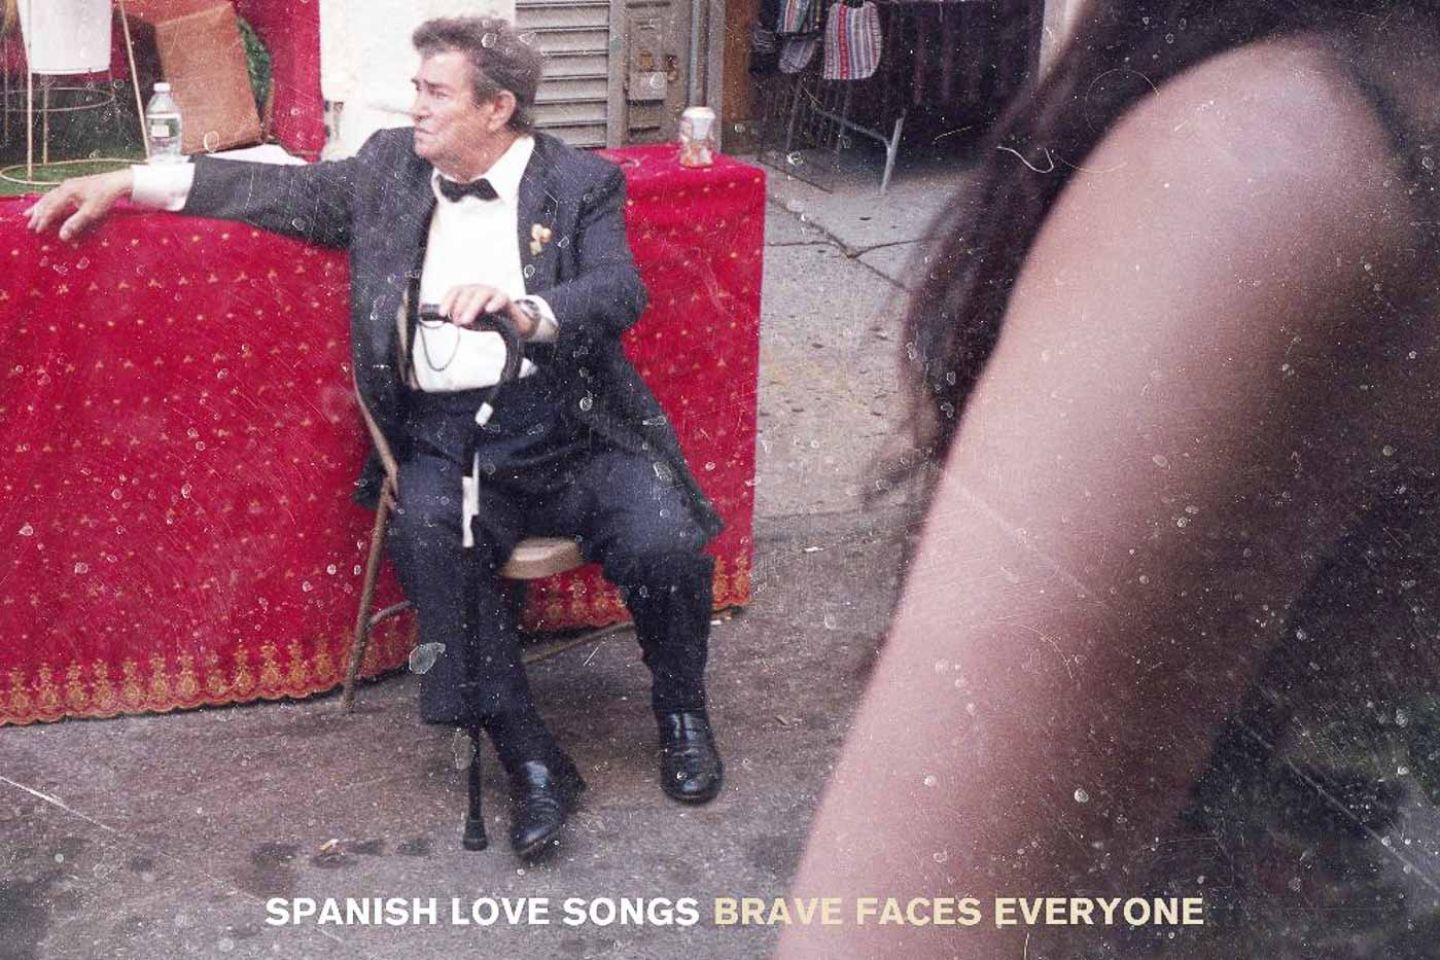 Spanish Love Songs “Brave Faces Everyone” (Pure Noise Records, 2020)